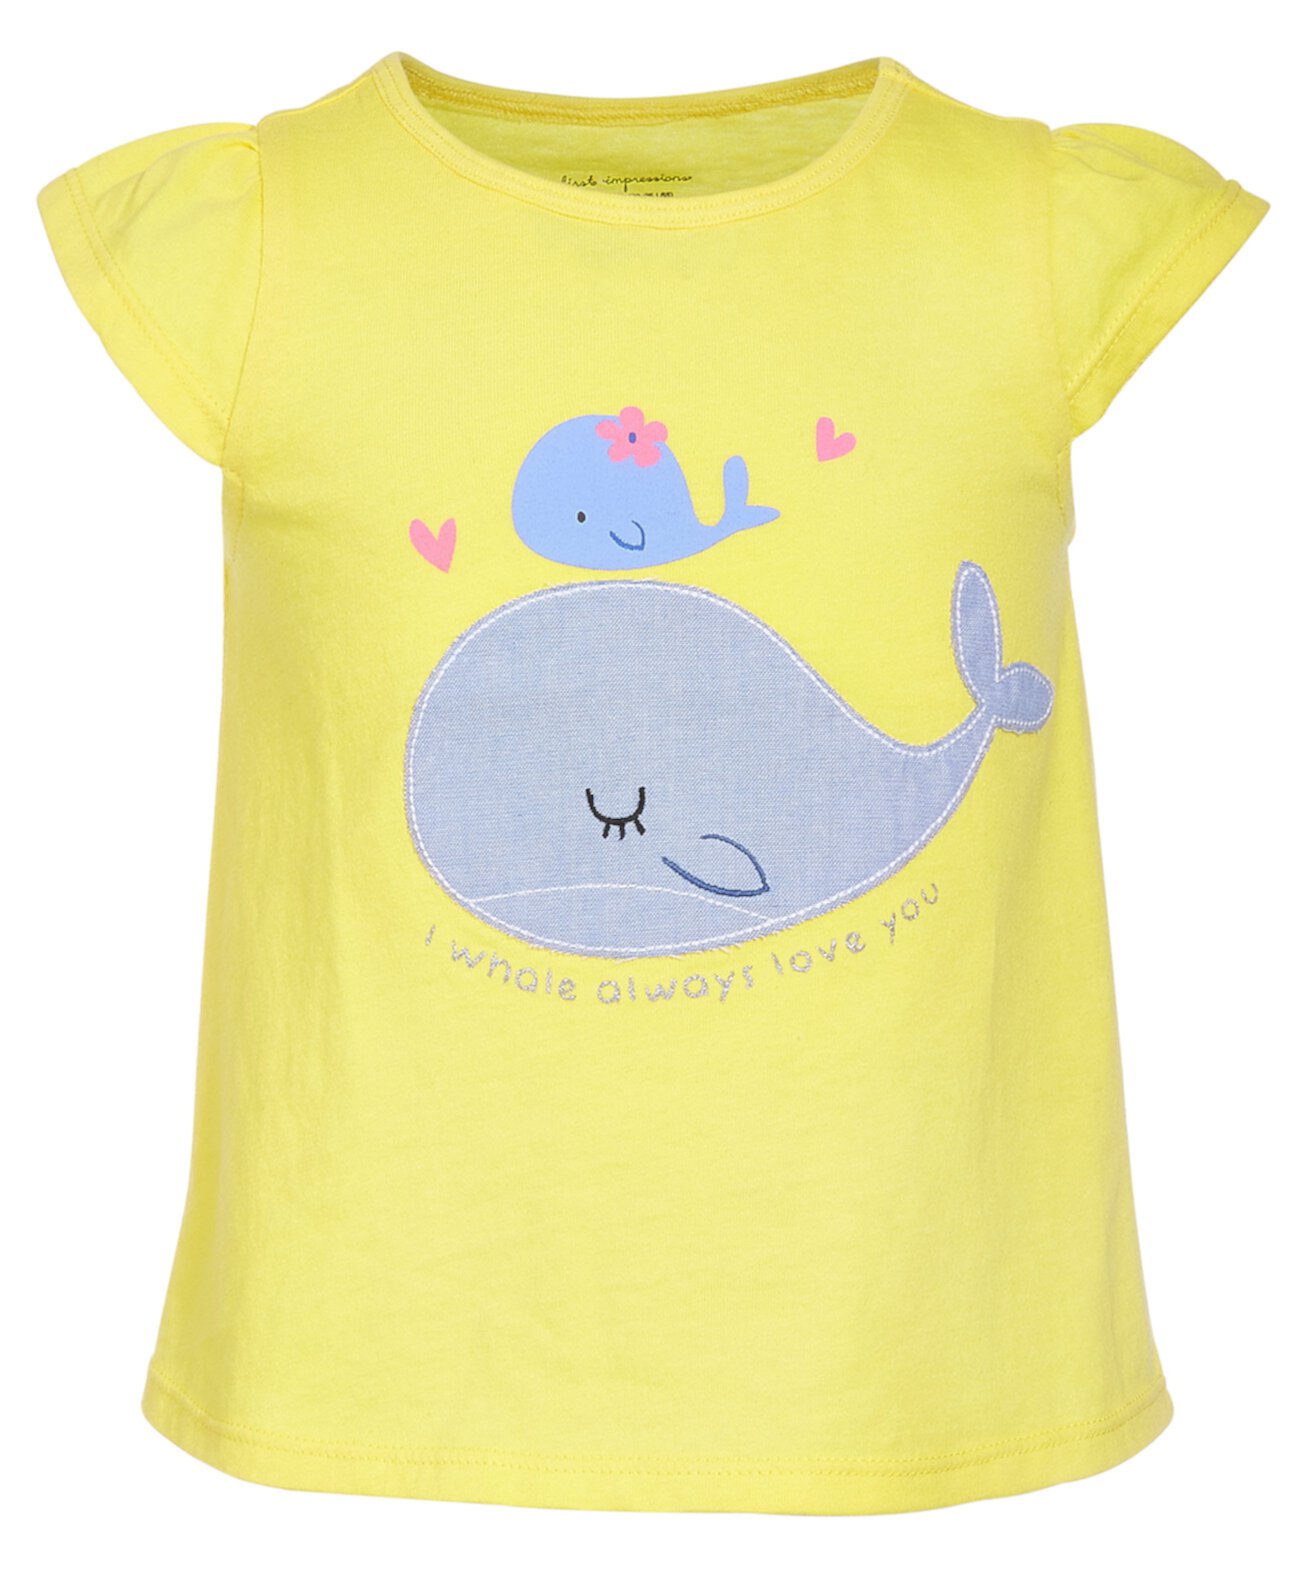 Toddler Girls Whale Love Cotton Top, Created for Macy's First Impressions